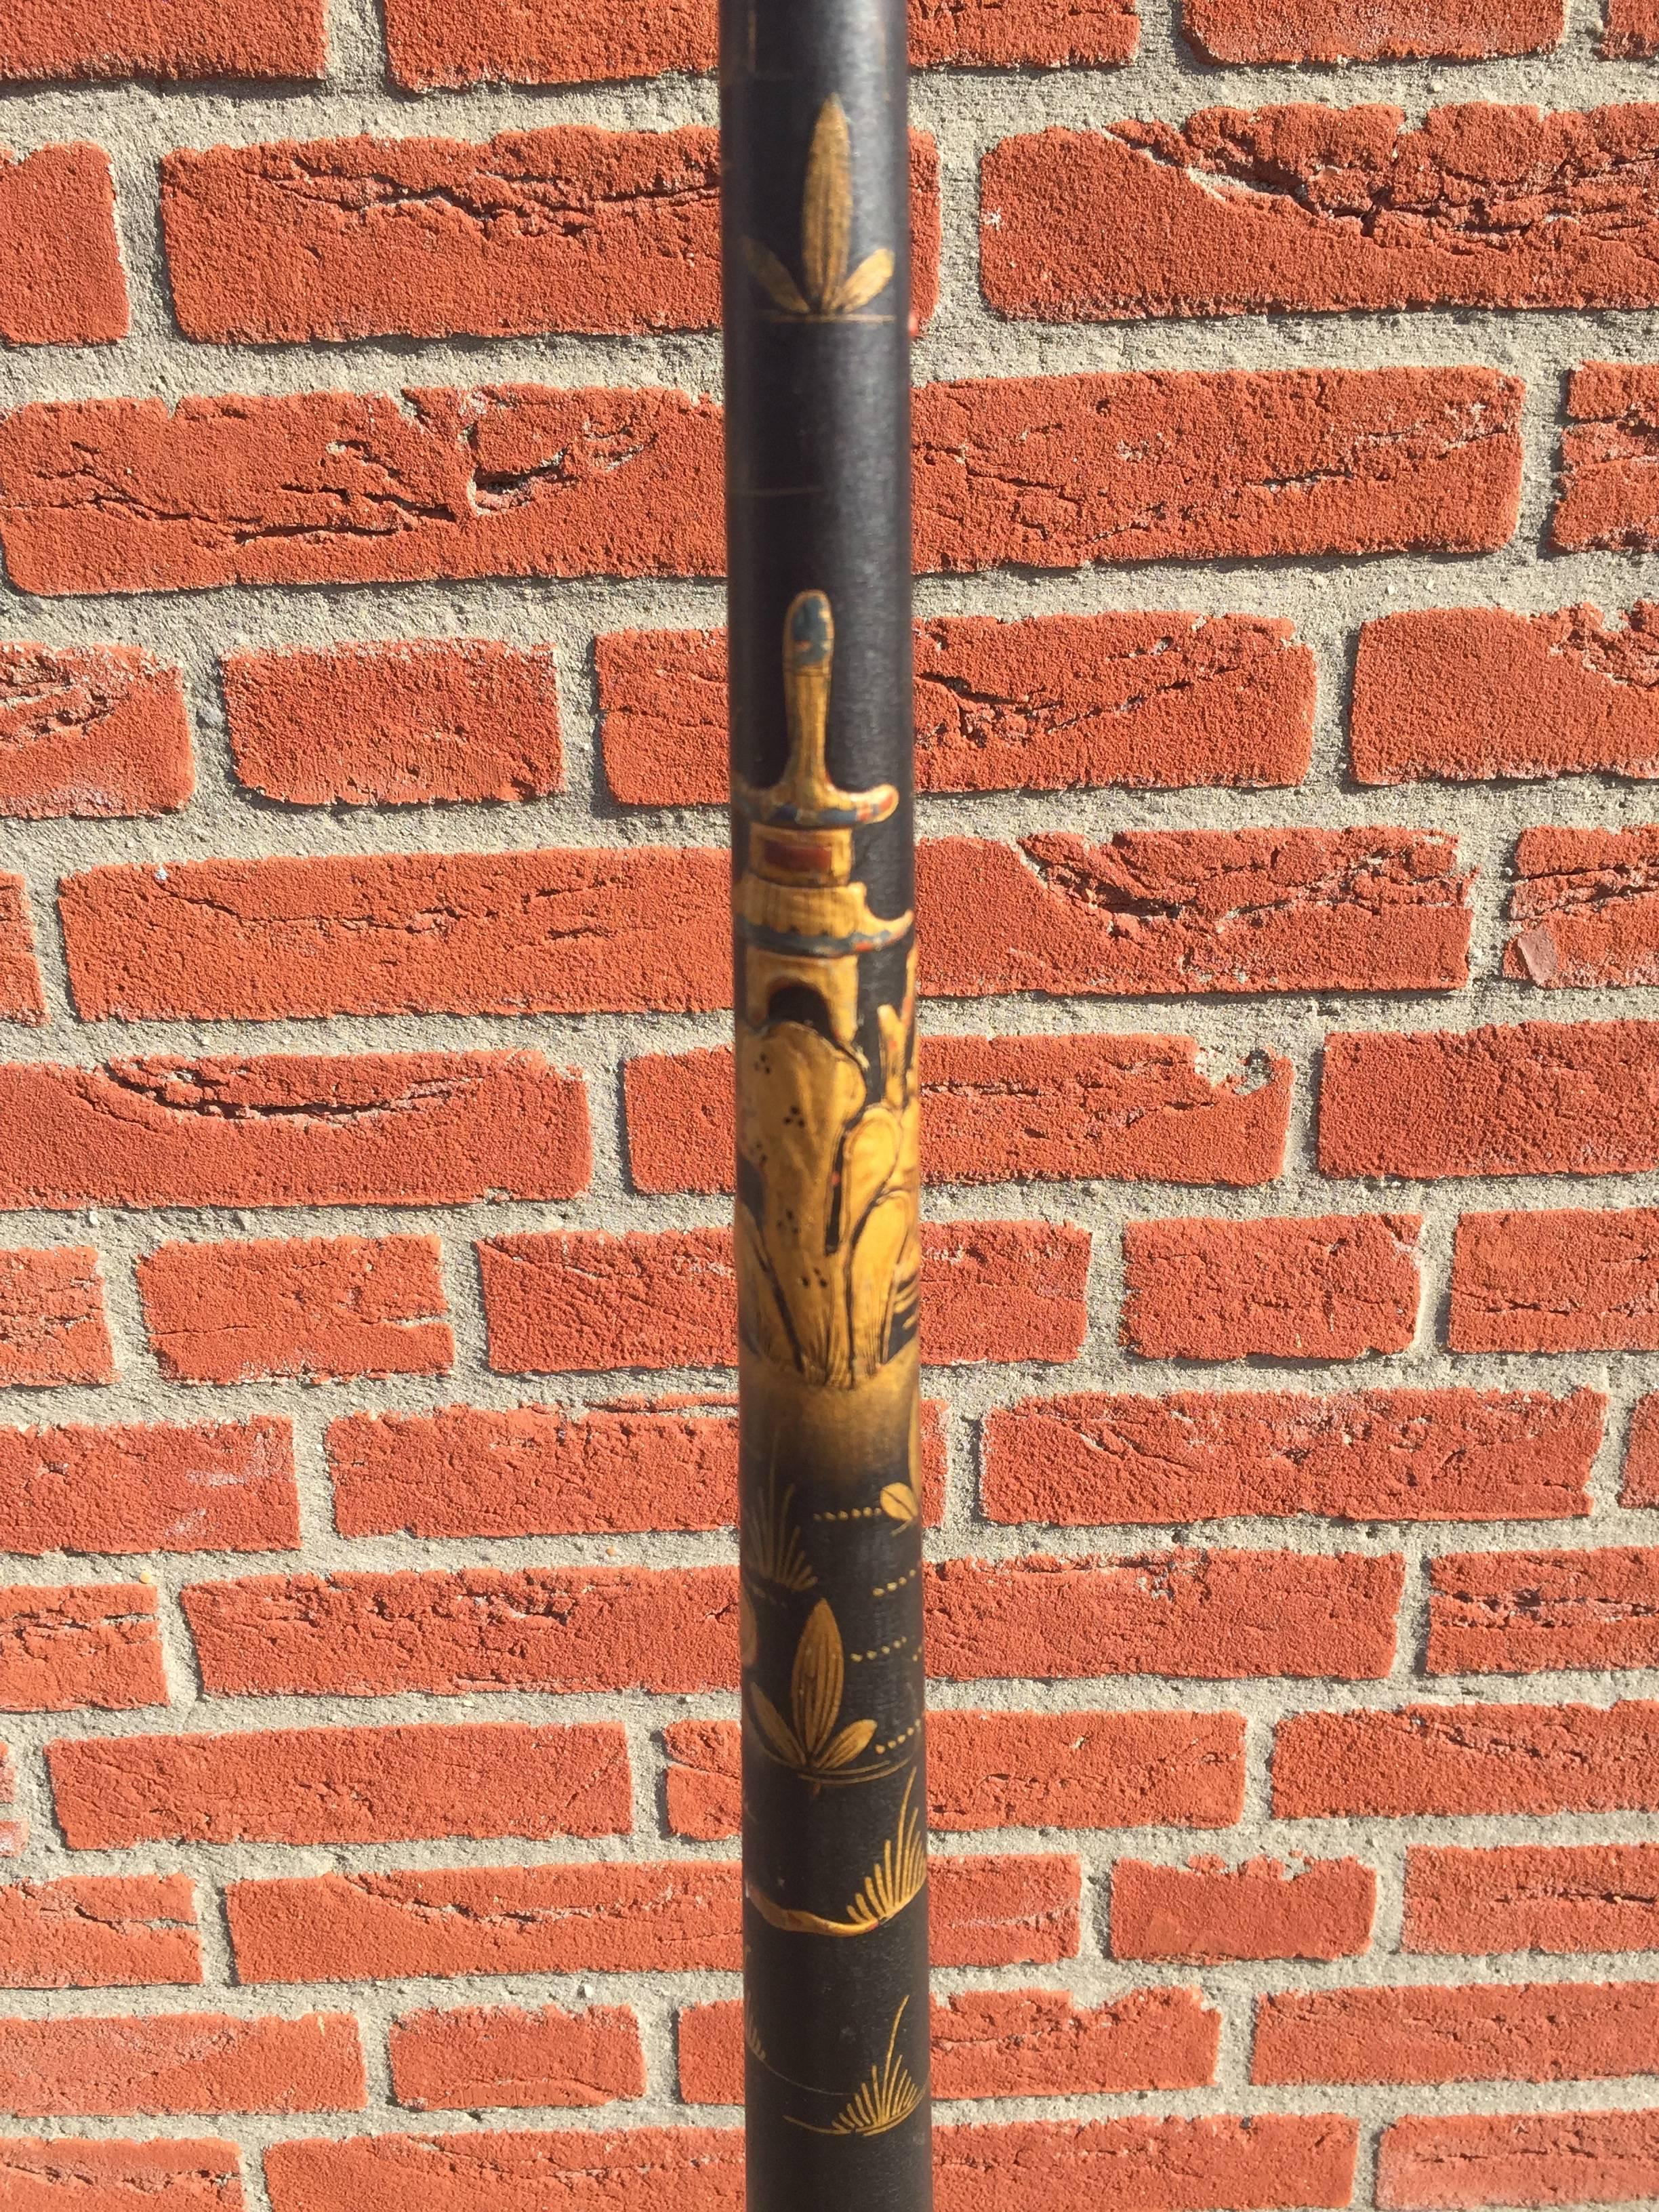 Hand-Crafted Early 1900s Wooden Chinoiserie Floor Lamp with Lacquer Decor and Chinese Motifs